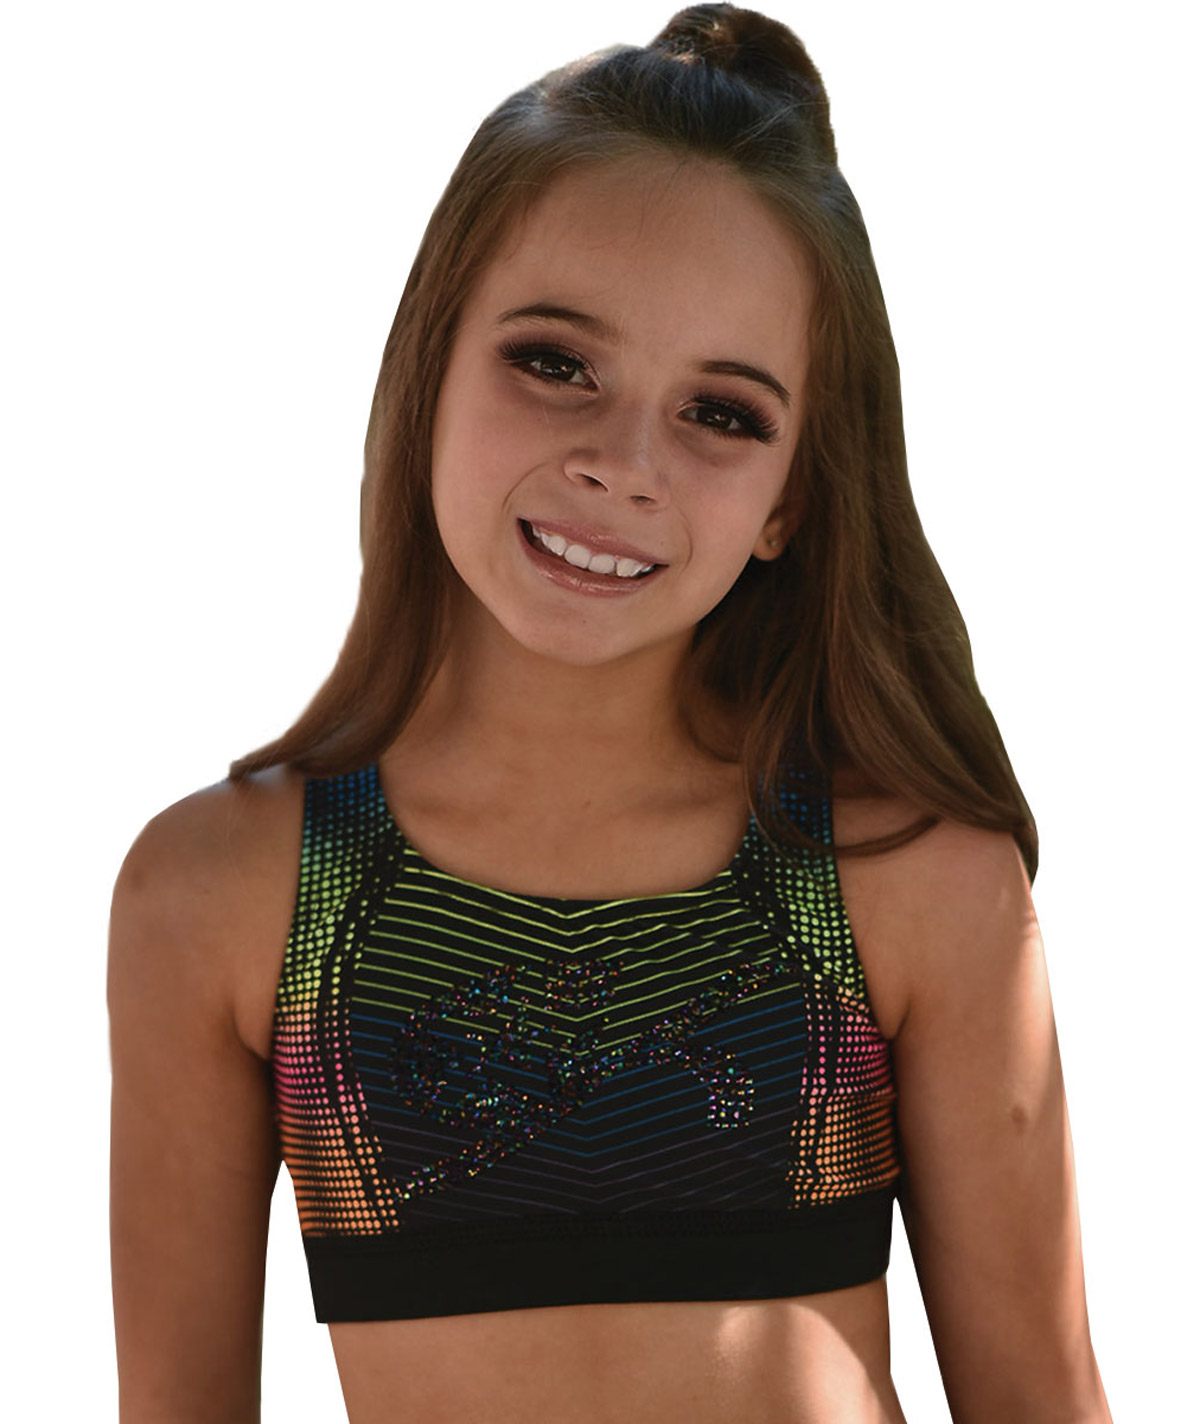 GK All Star Live Life in Color - Crop Top